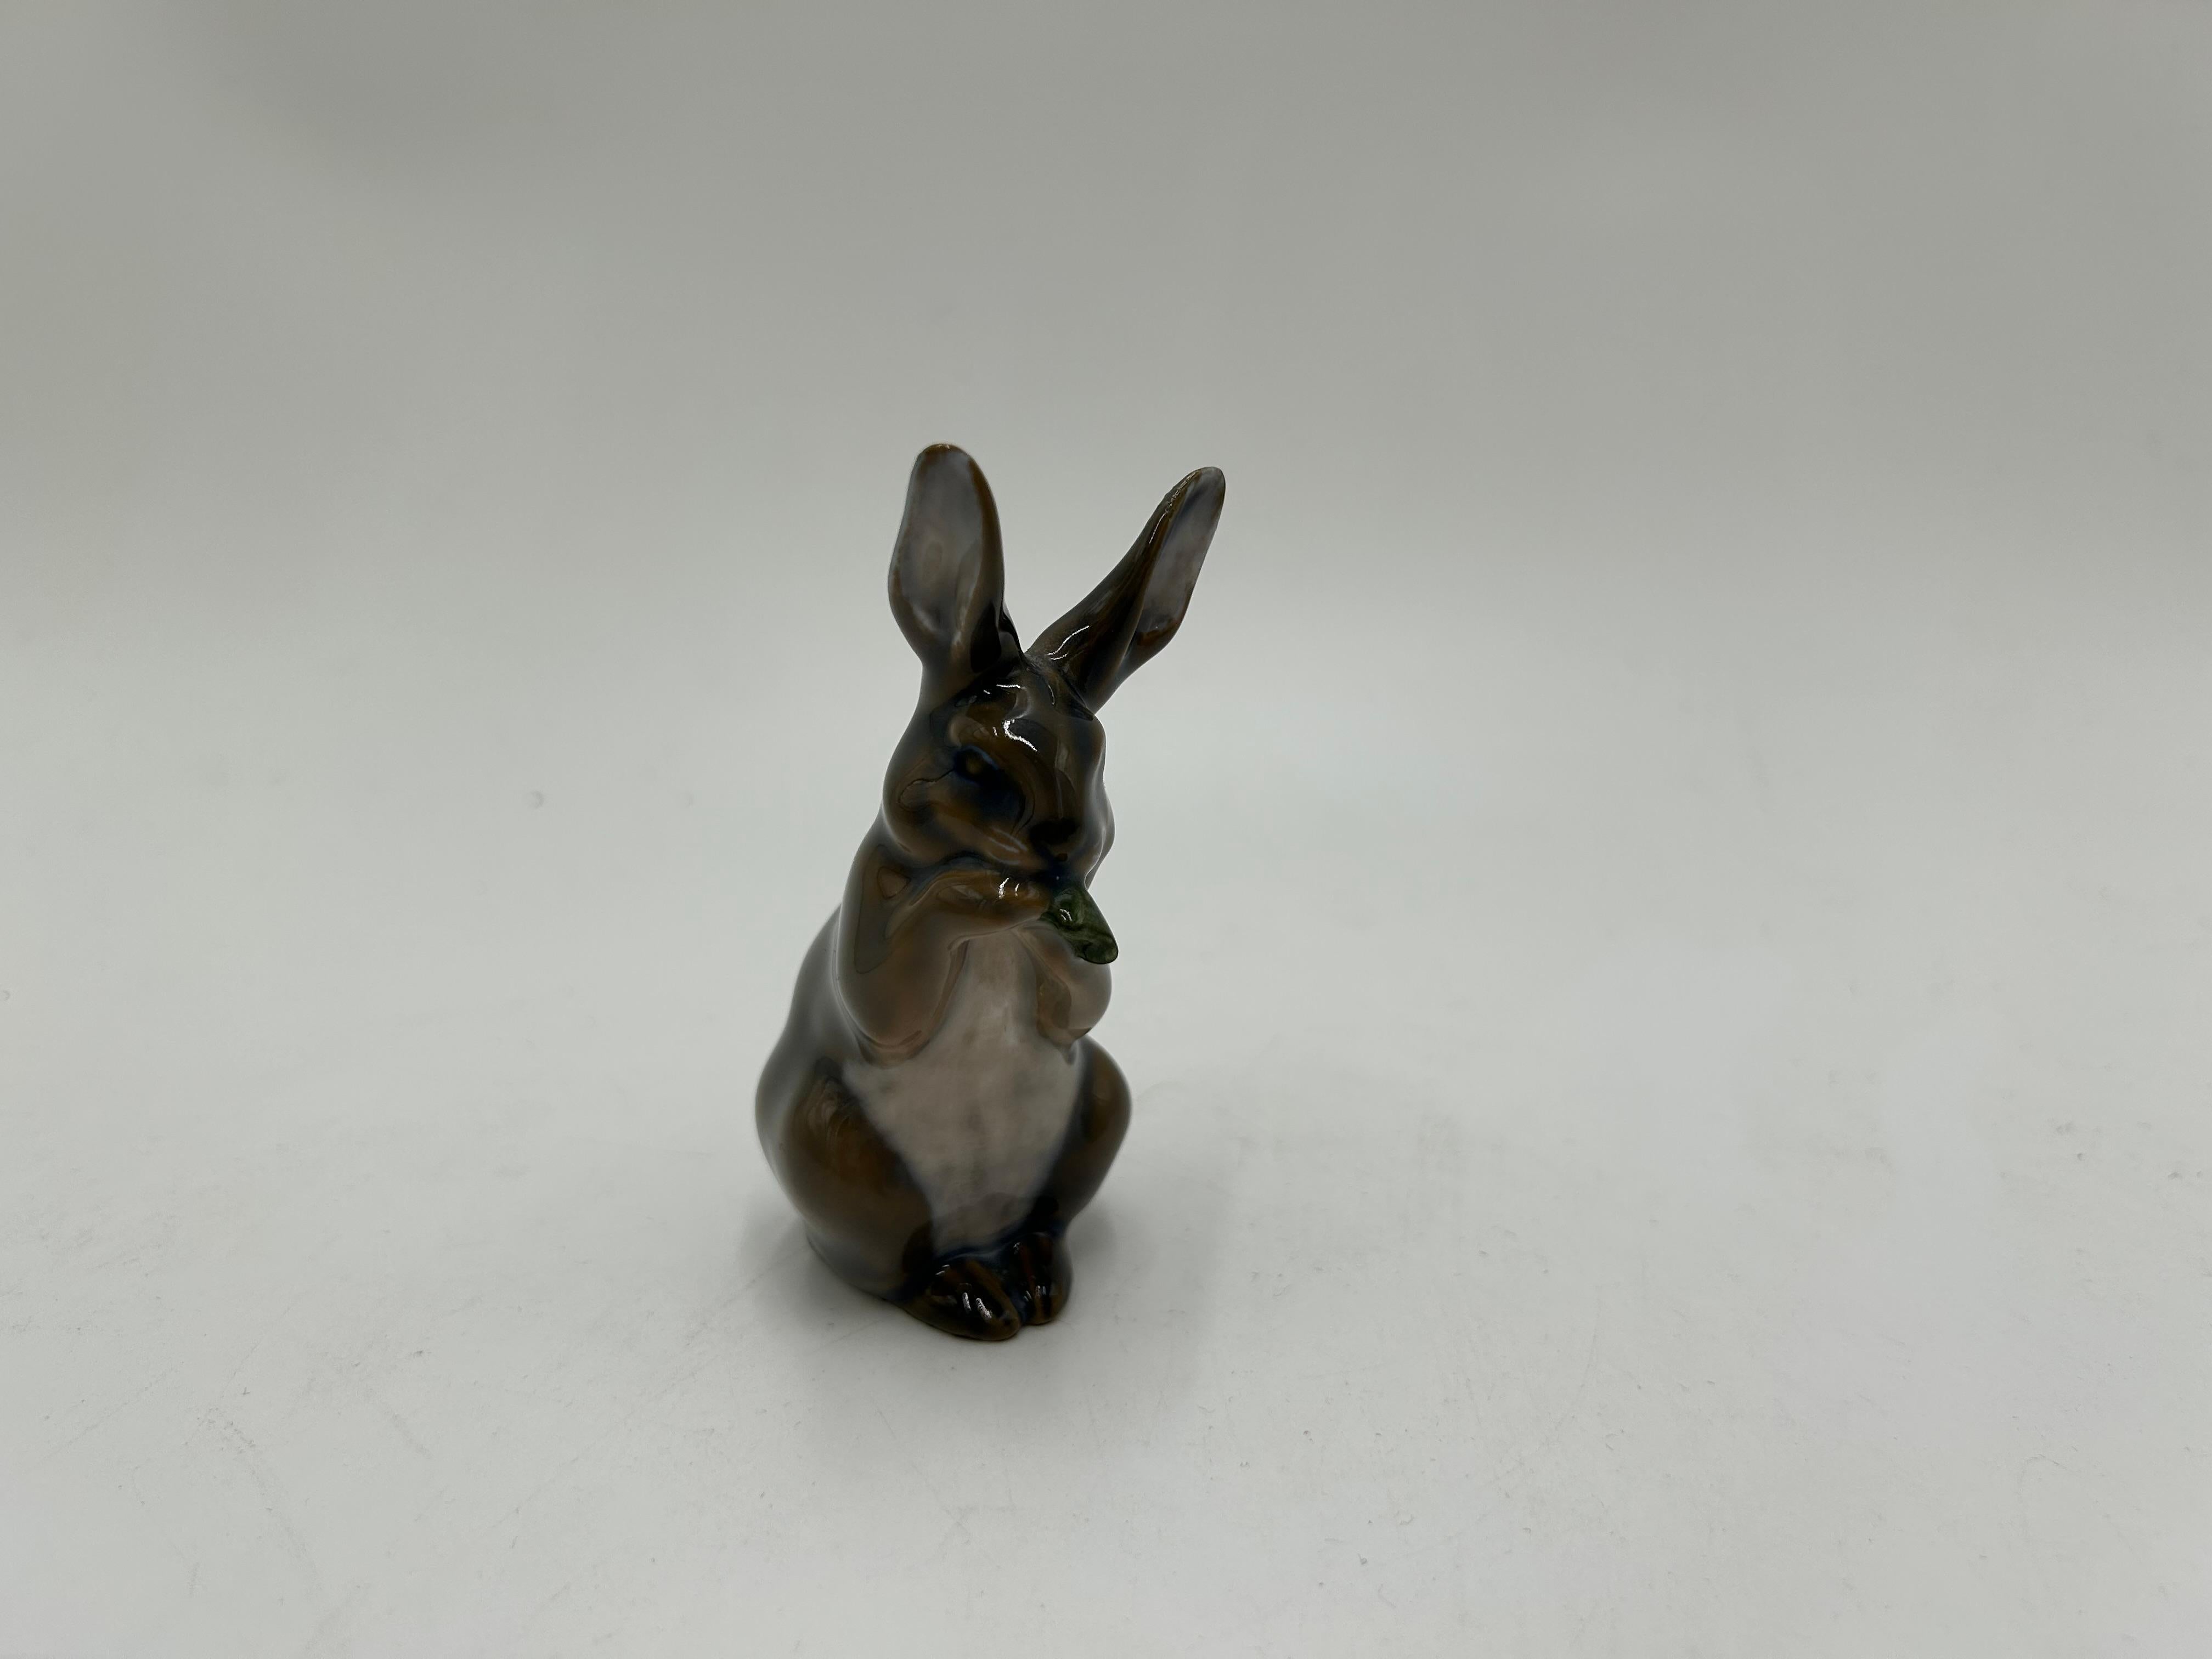 Porcelain hare figurine model #1019
Produced by the Danish manufacture Royal Copenhagen
Mark used in the 1960s.
Very good condition, no damage
Measures: height: 9cm
width: 4cm
depth: 4cm.